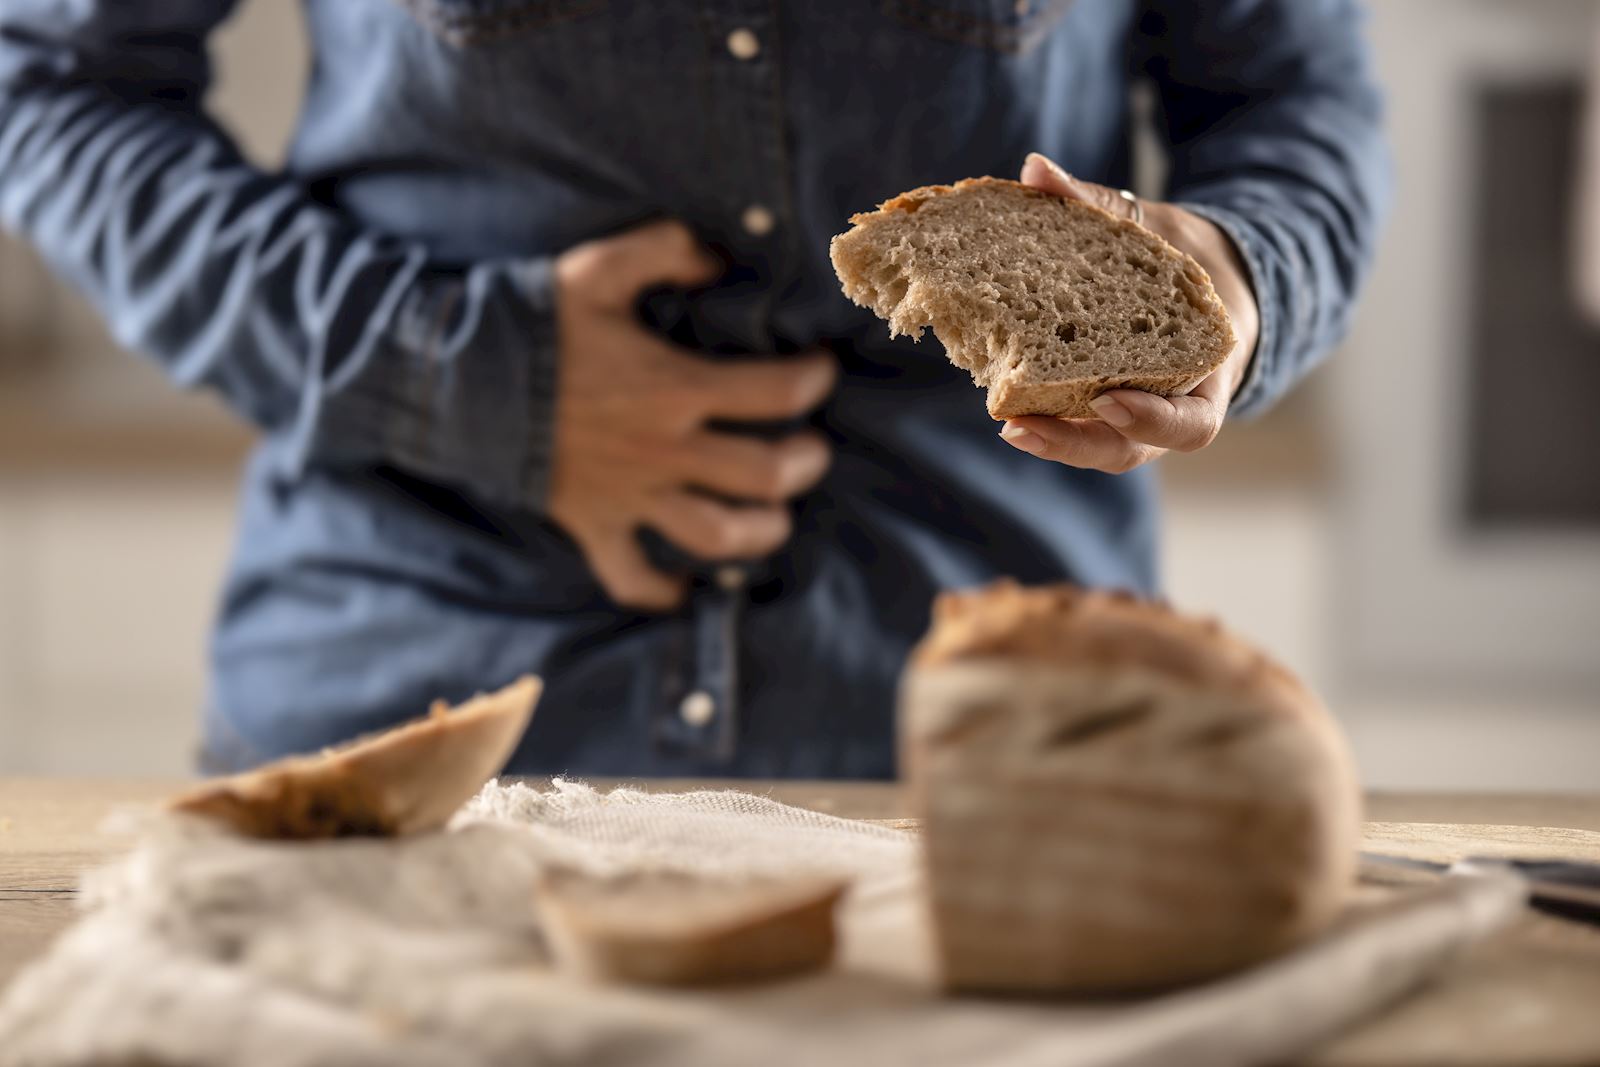 Celiac Disease: Why Some People Really Have to Avoid Gluten